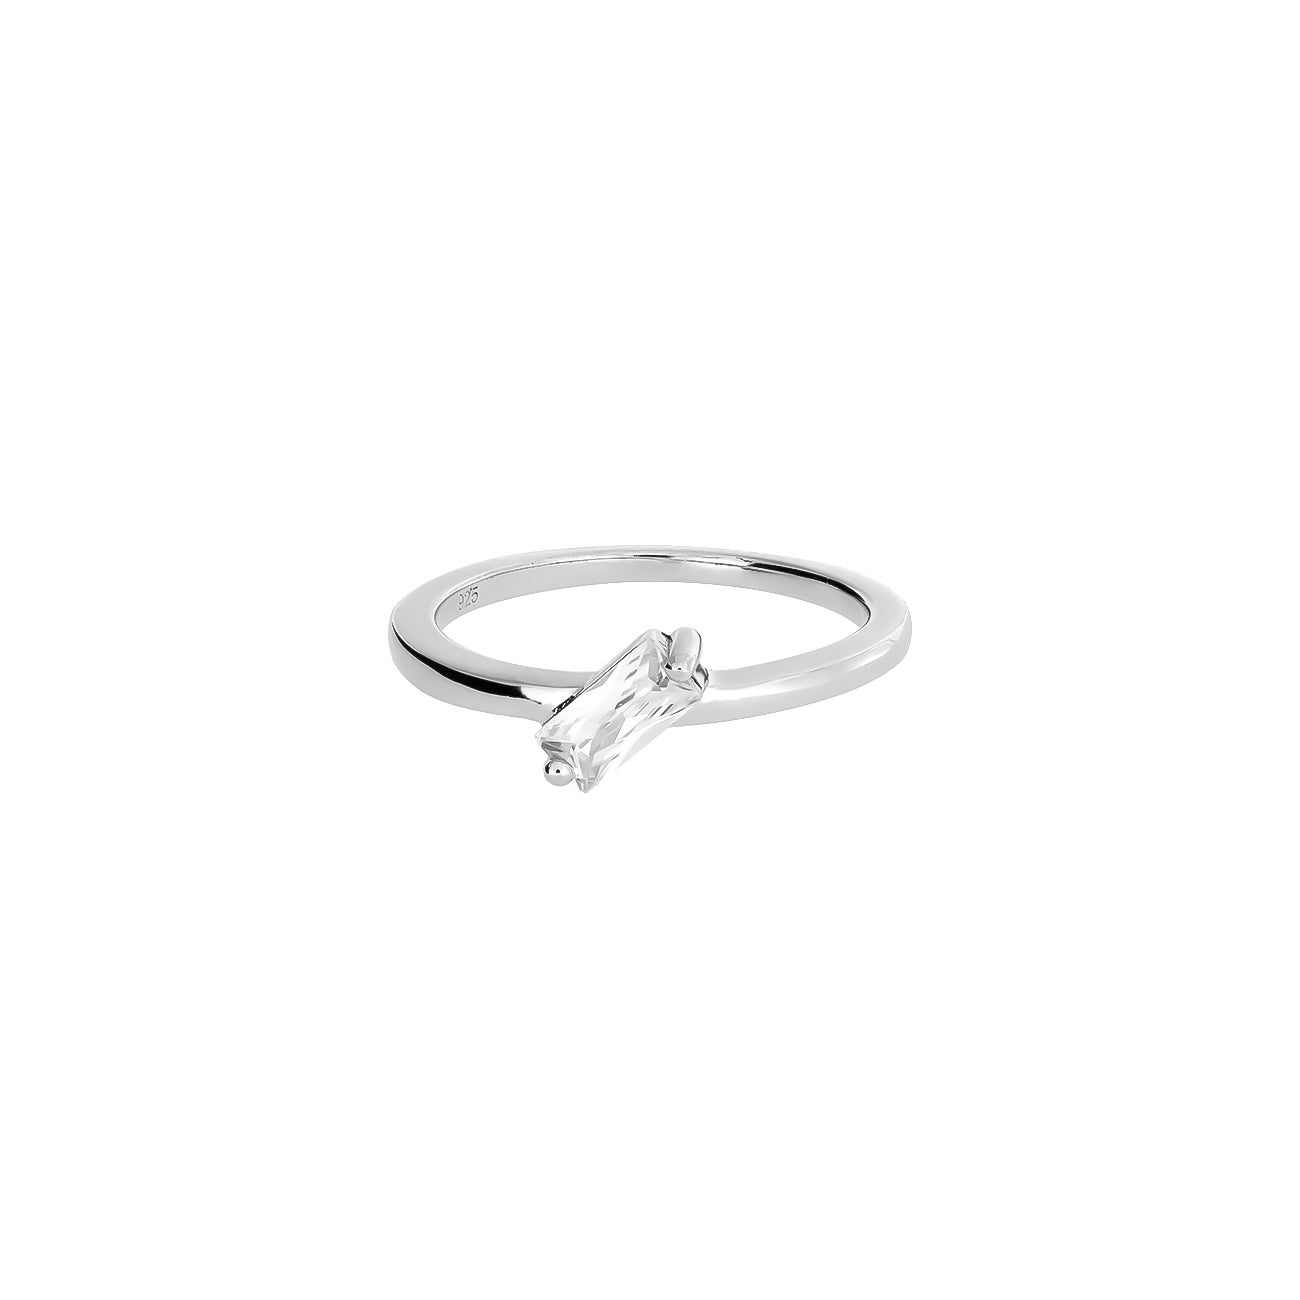 Silver & Baguette Stone Ring